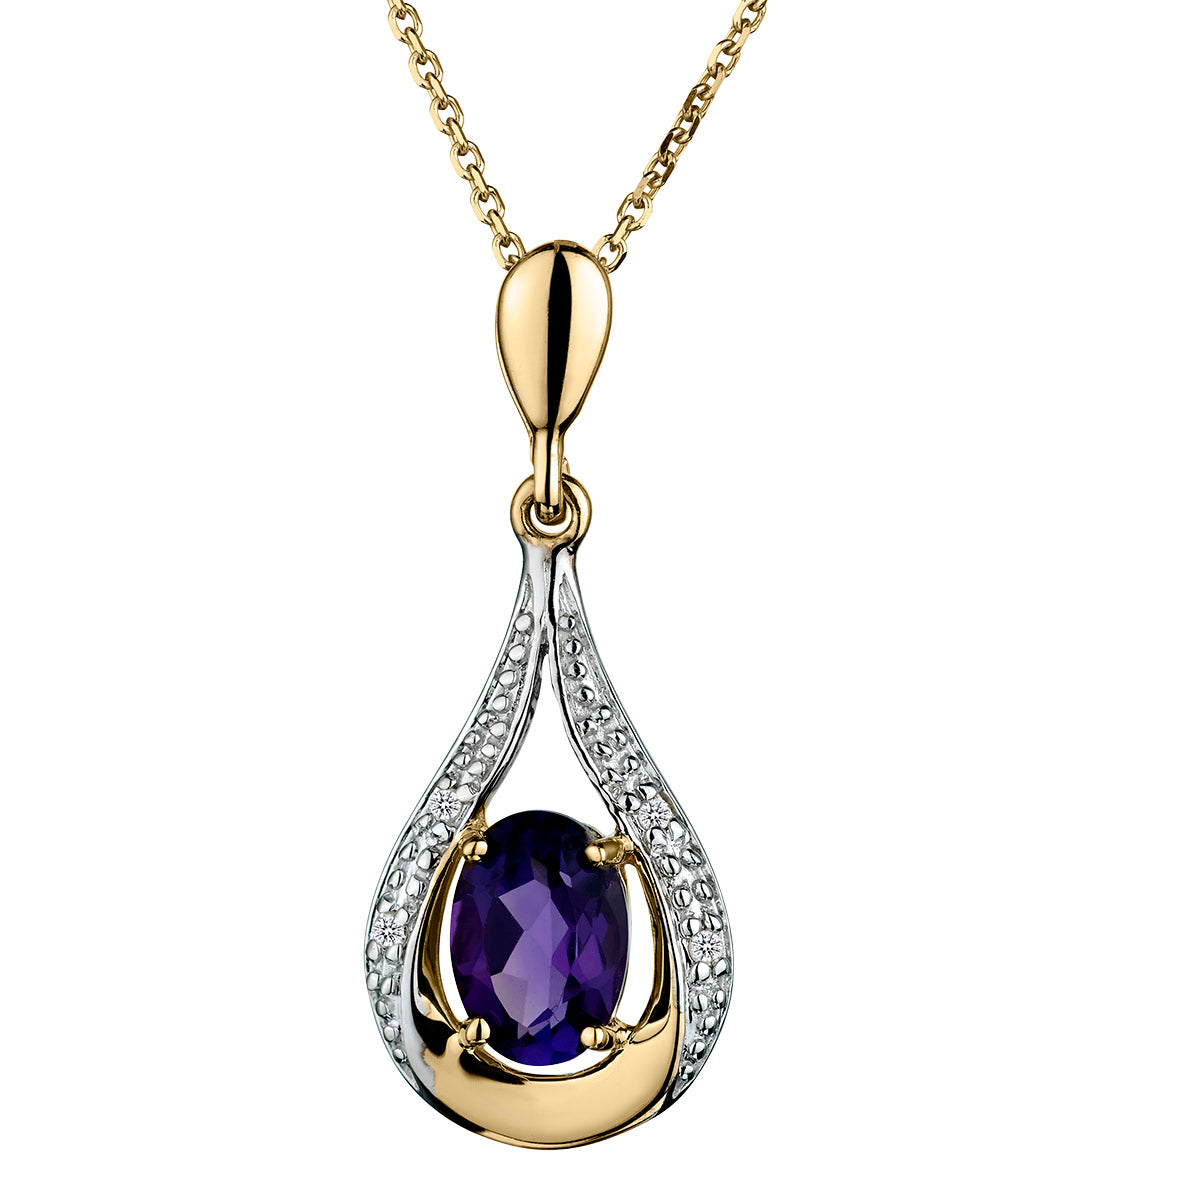 Genuine Amethyst & Diamond Pendant,  10kt Yellow Gold. Necklaces and Pendants. Griffin Jewellery Designs. 